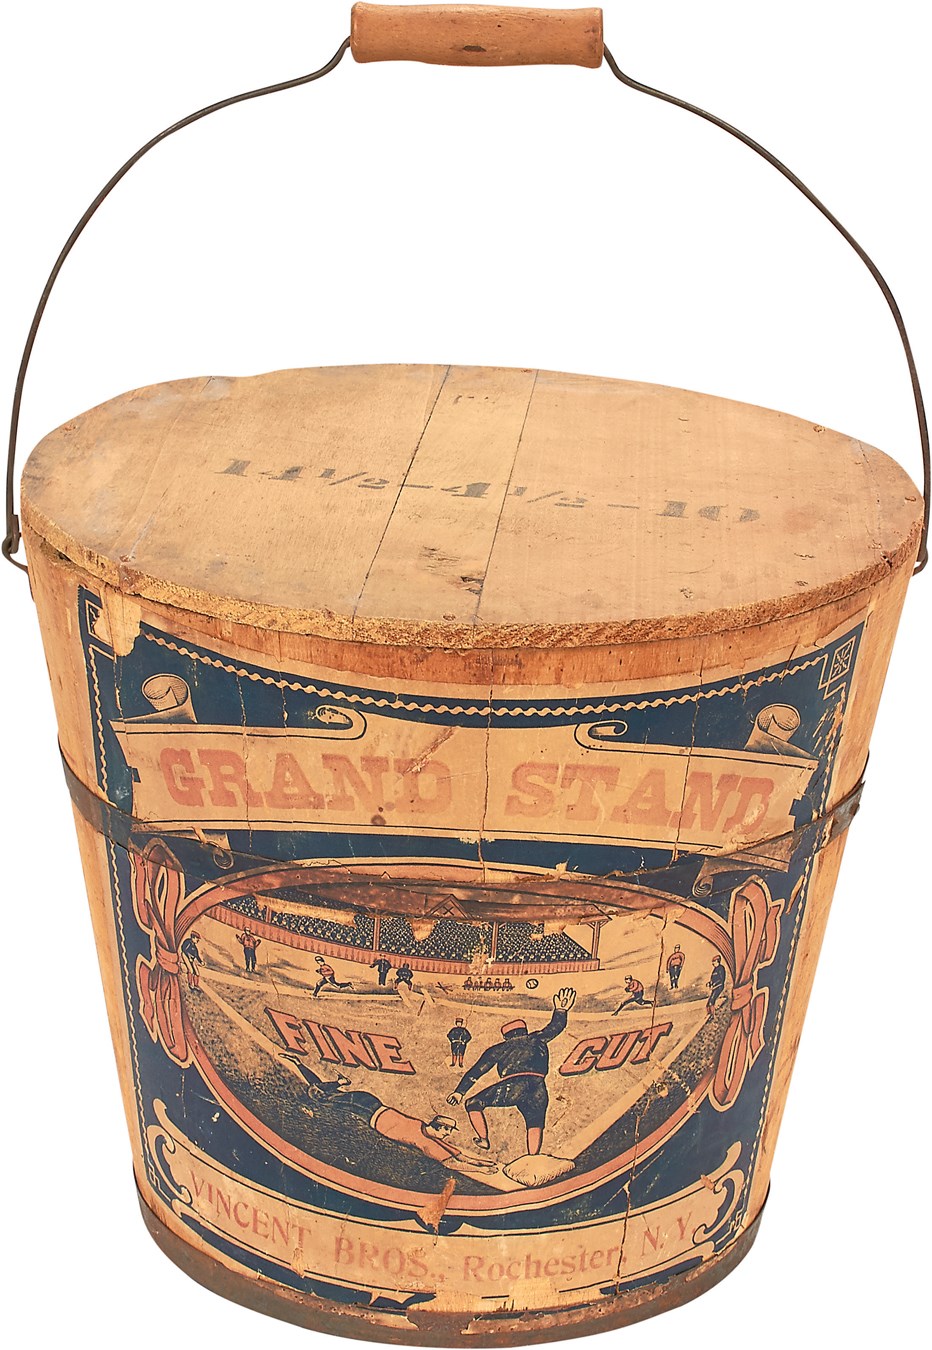 Early Baseball - Wonderful 19th Century "Grand Stand" Baseball Tobacco Bucket - Only One Known